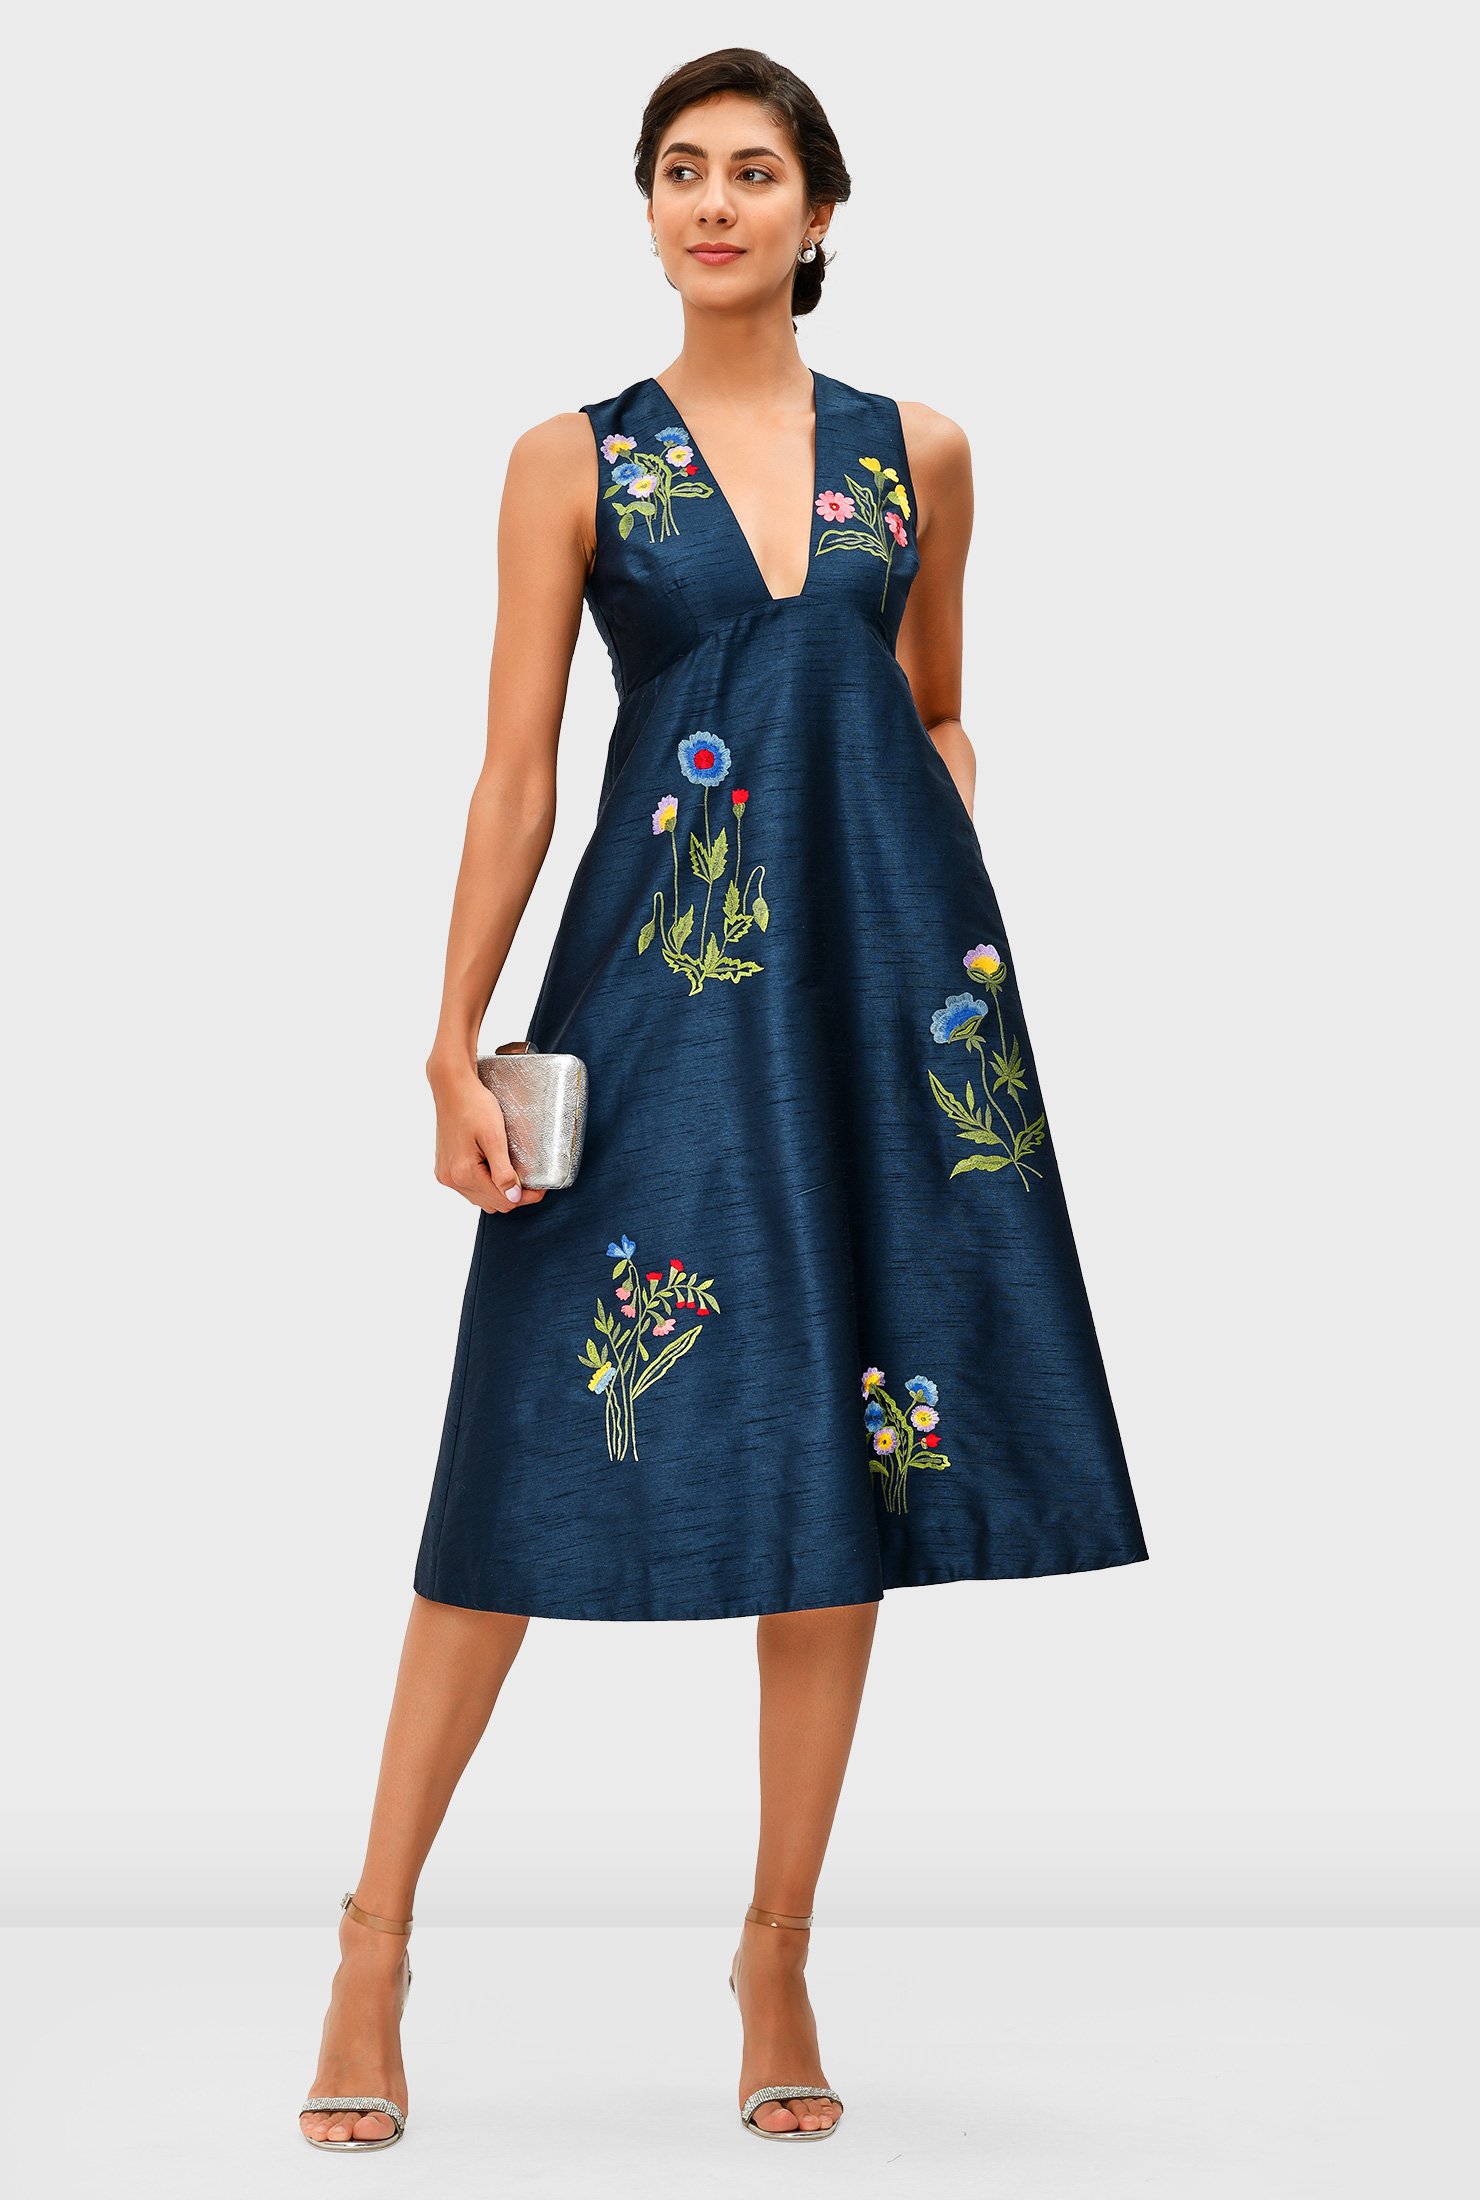 Floral embroidery dupioni empire dress